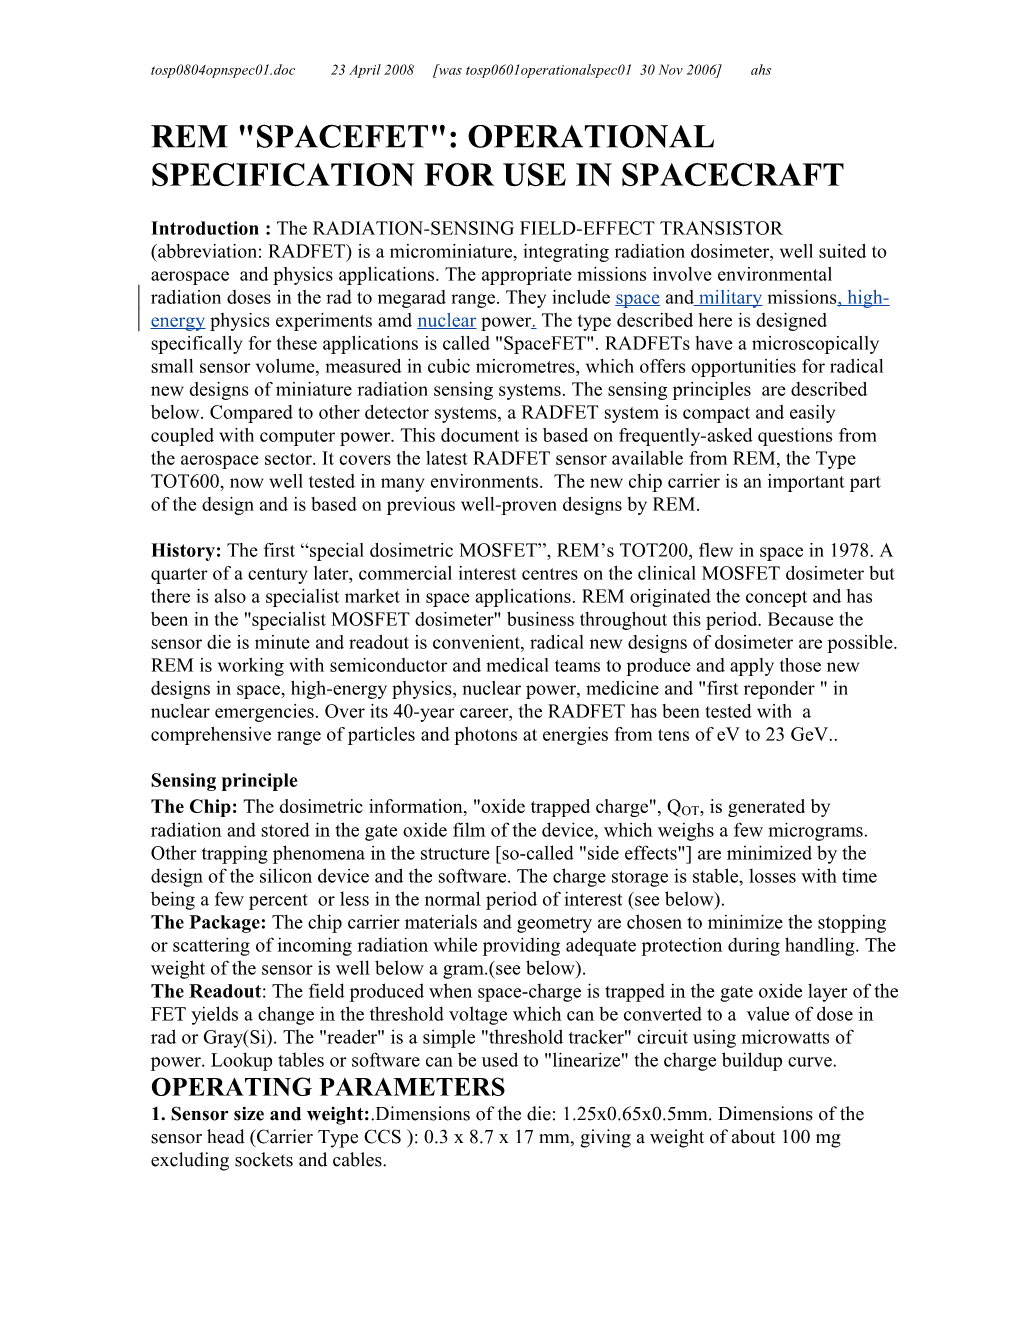 Rem Spacefet : Operational Specification for Use in Spacecraft